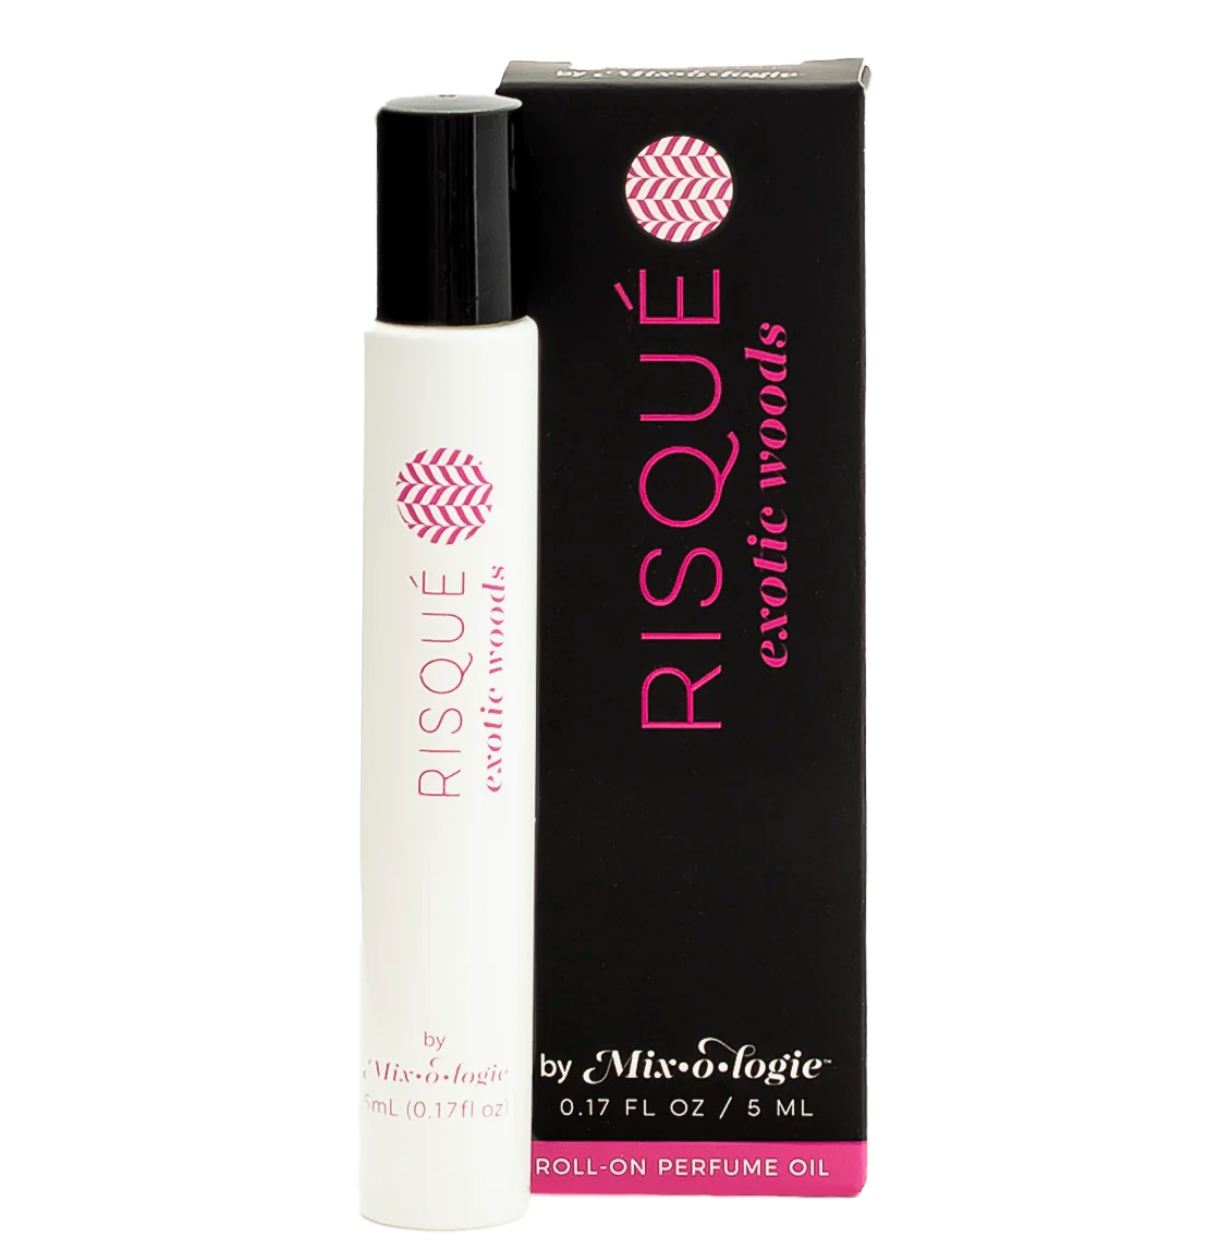 RISQUÉ (exotic woods) Rollerball Perfume